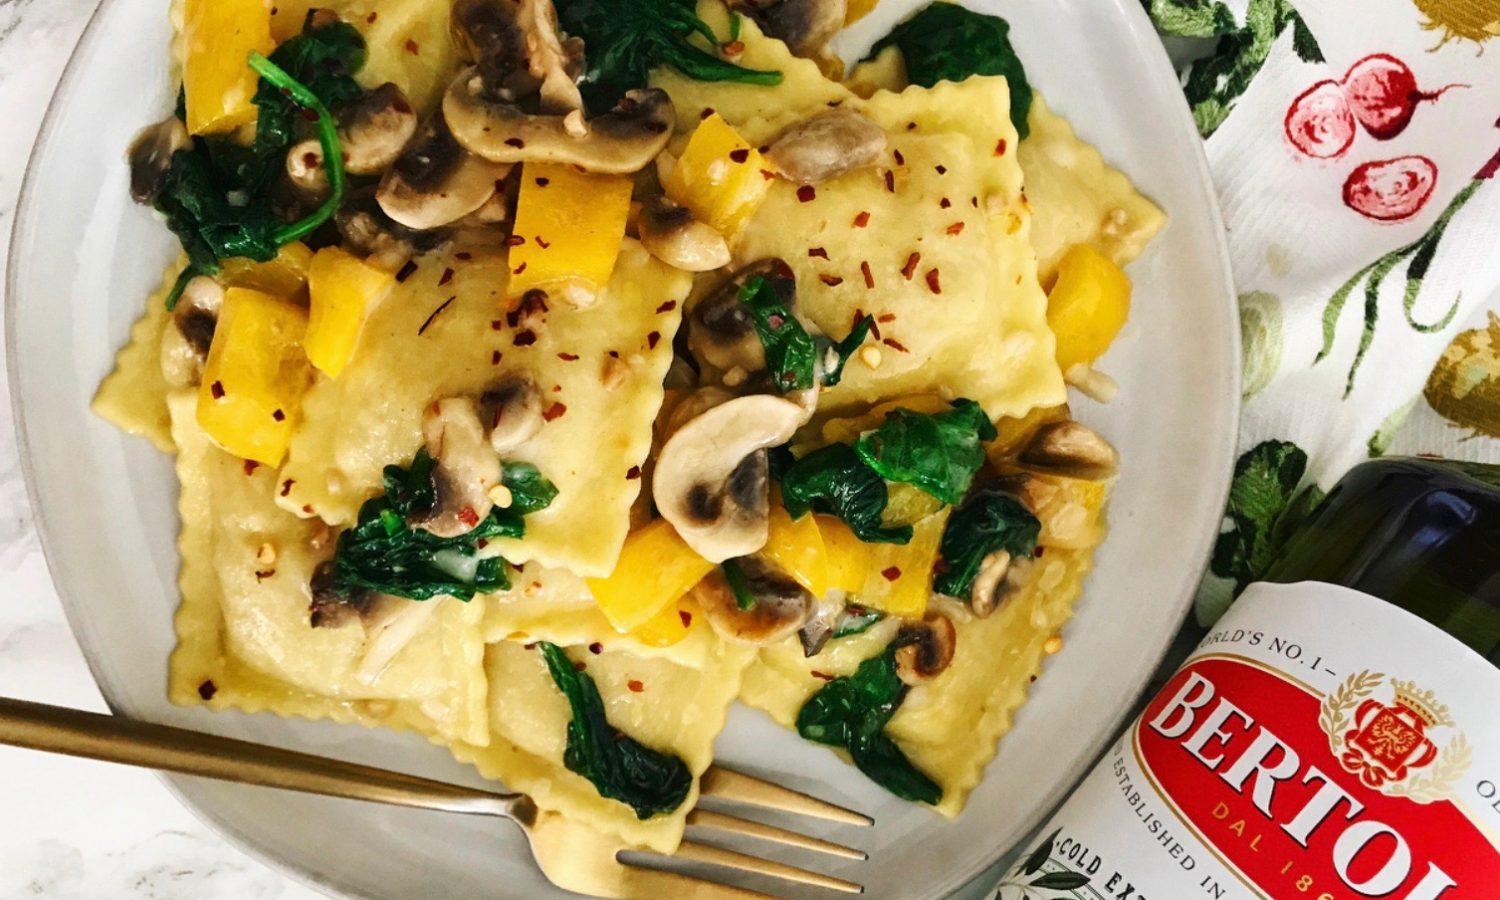 Family Dinner Ideas with Bertolli Olive Oil